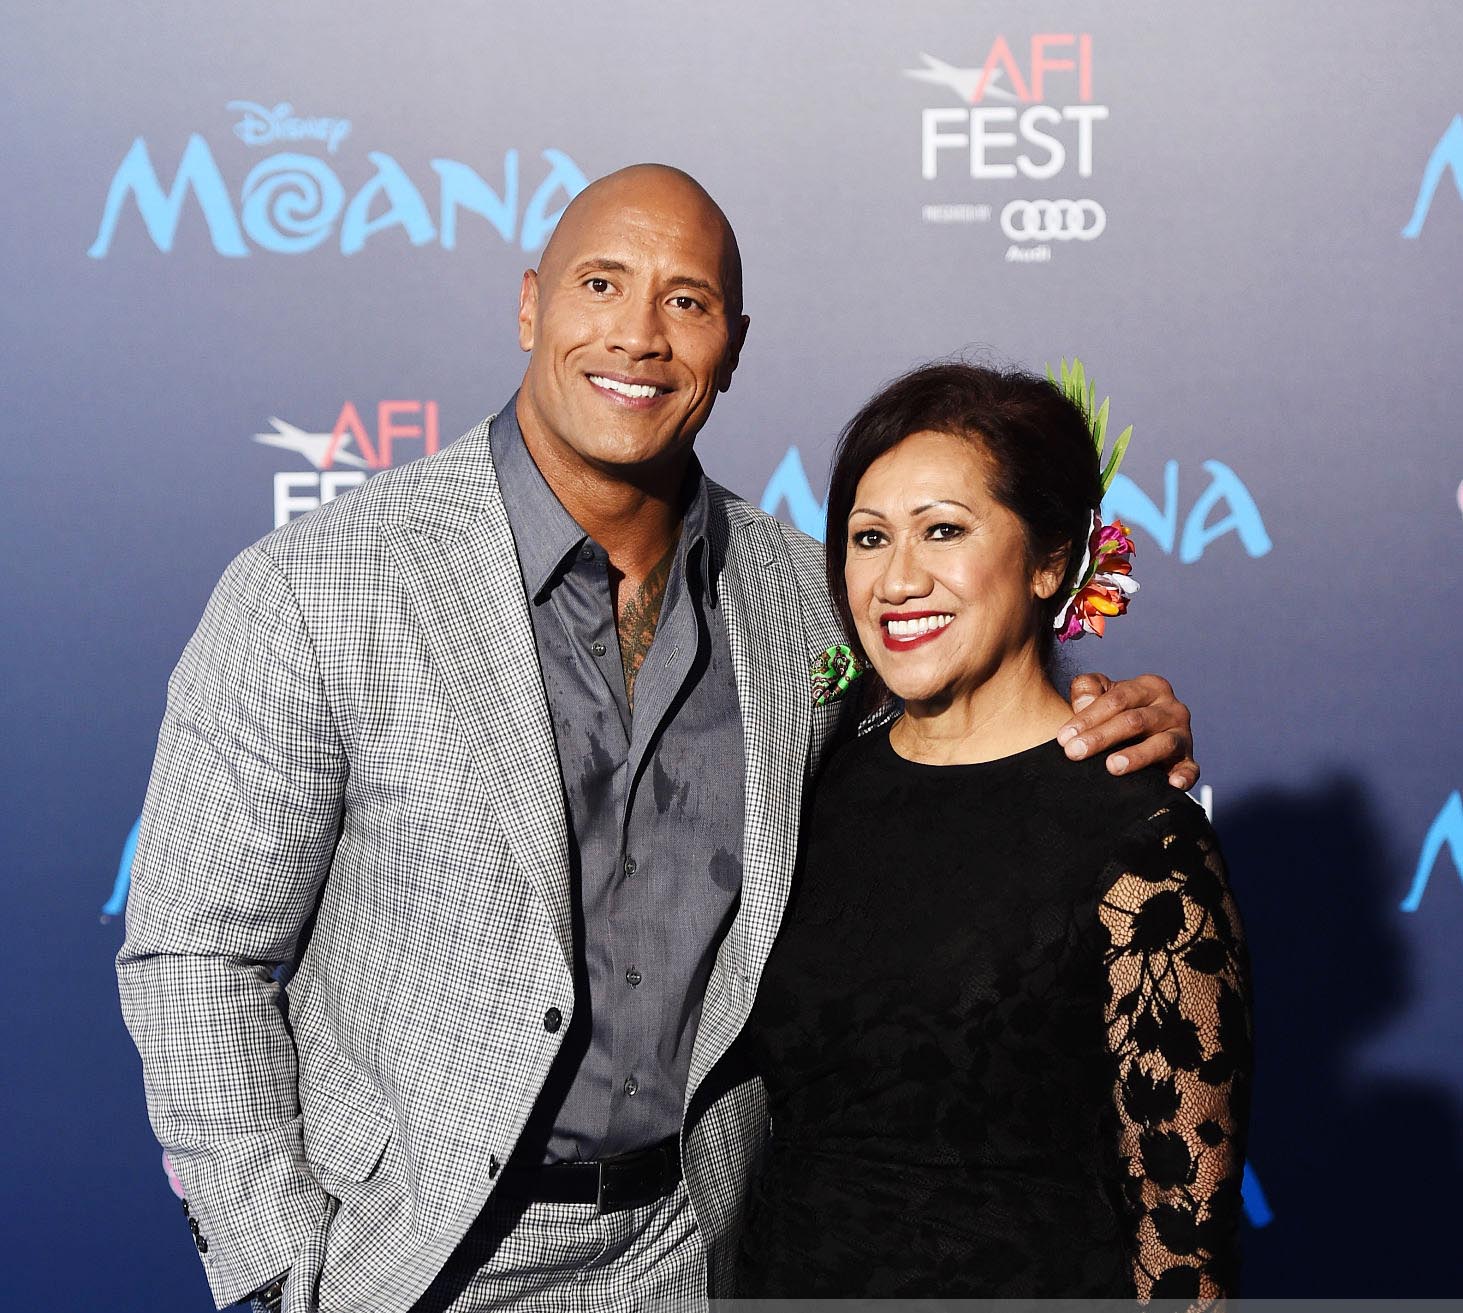 Dwayne 'The Rock' Johnson with his arm around mother Ata Johnson at the premiere of Disney Moana